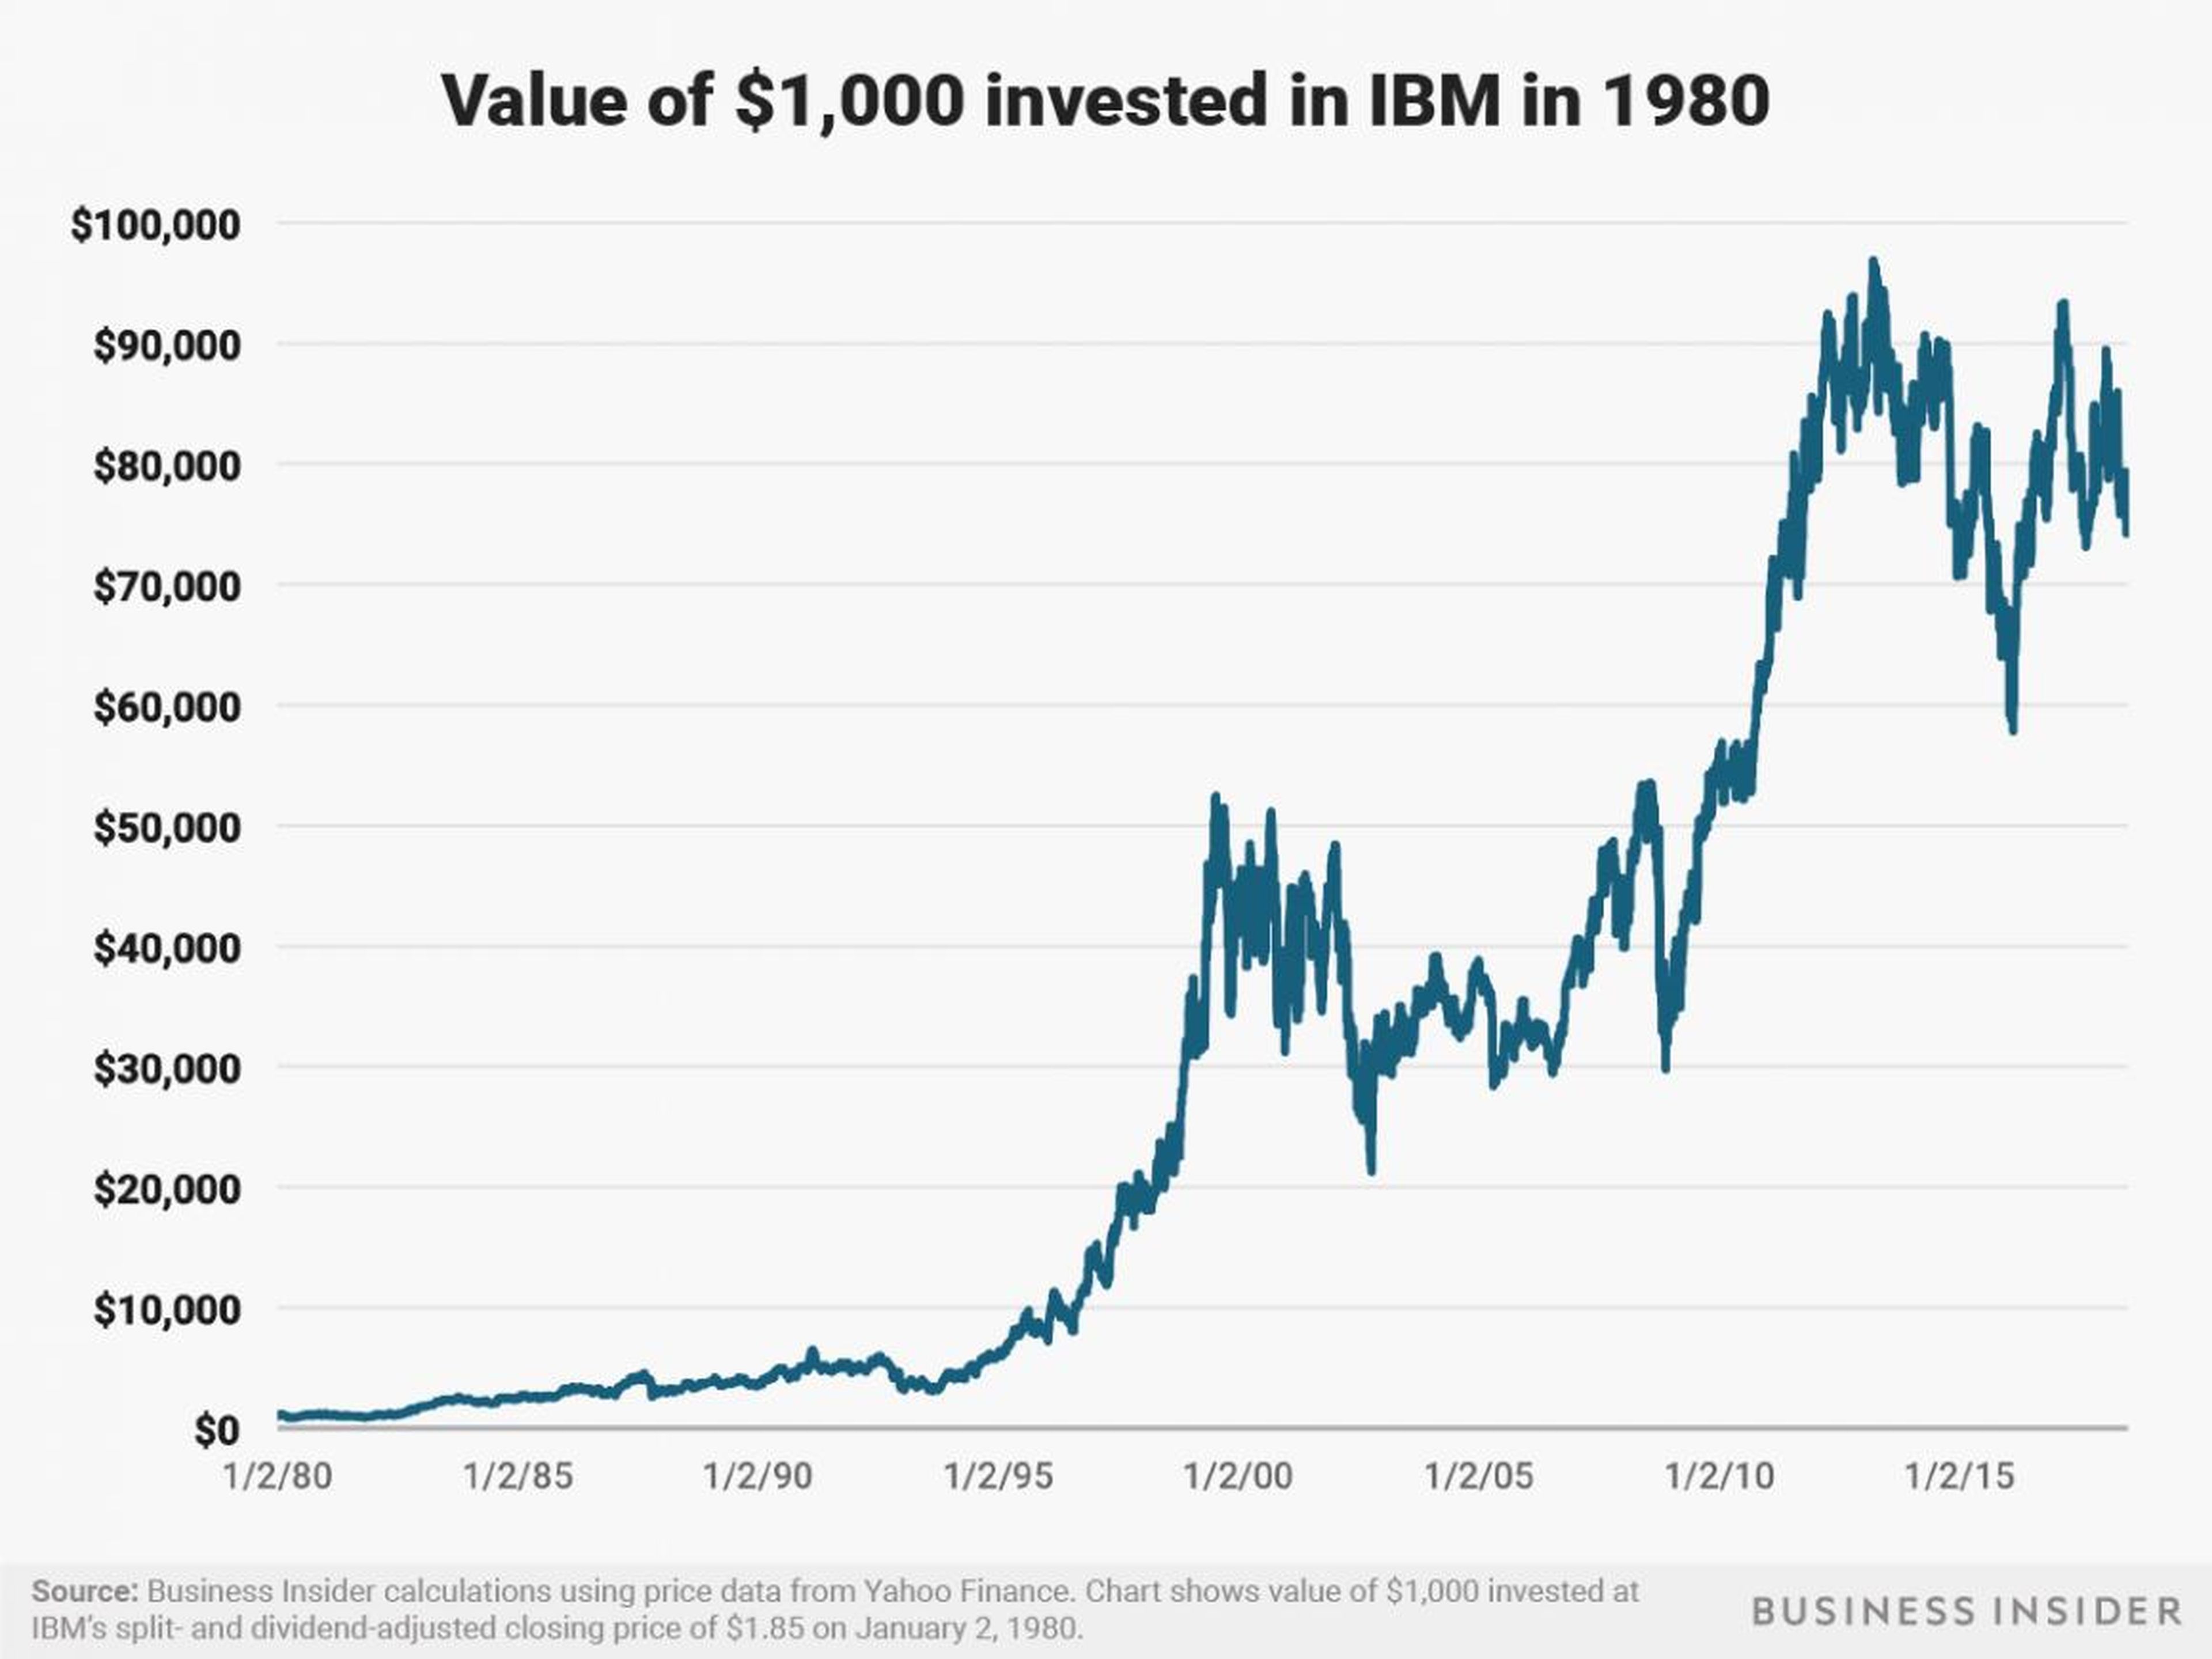 A $1,000 investment in IBM at the start of 1980 would be worth around $75,000 as of July 3, 2018.